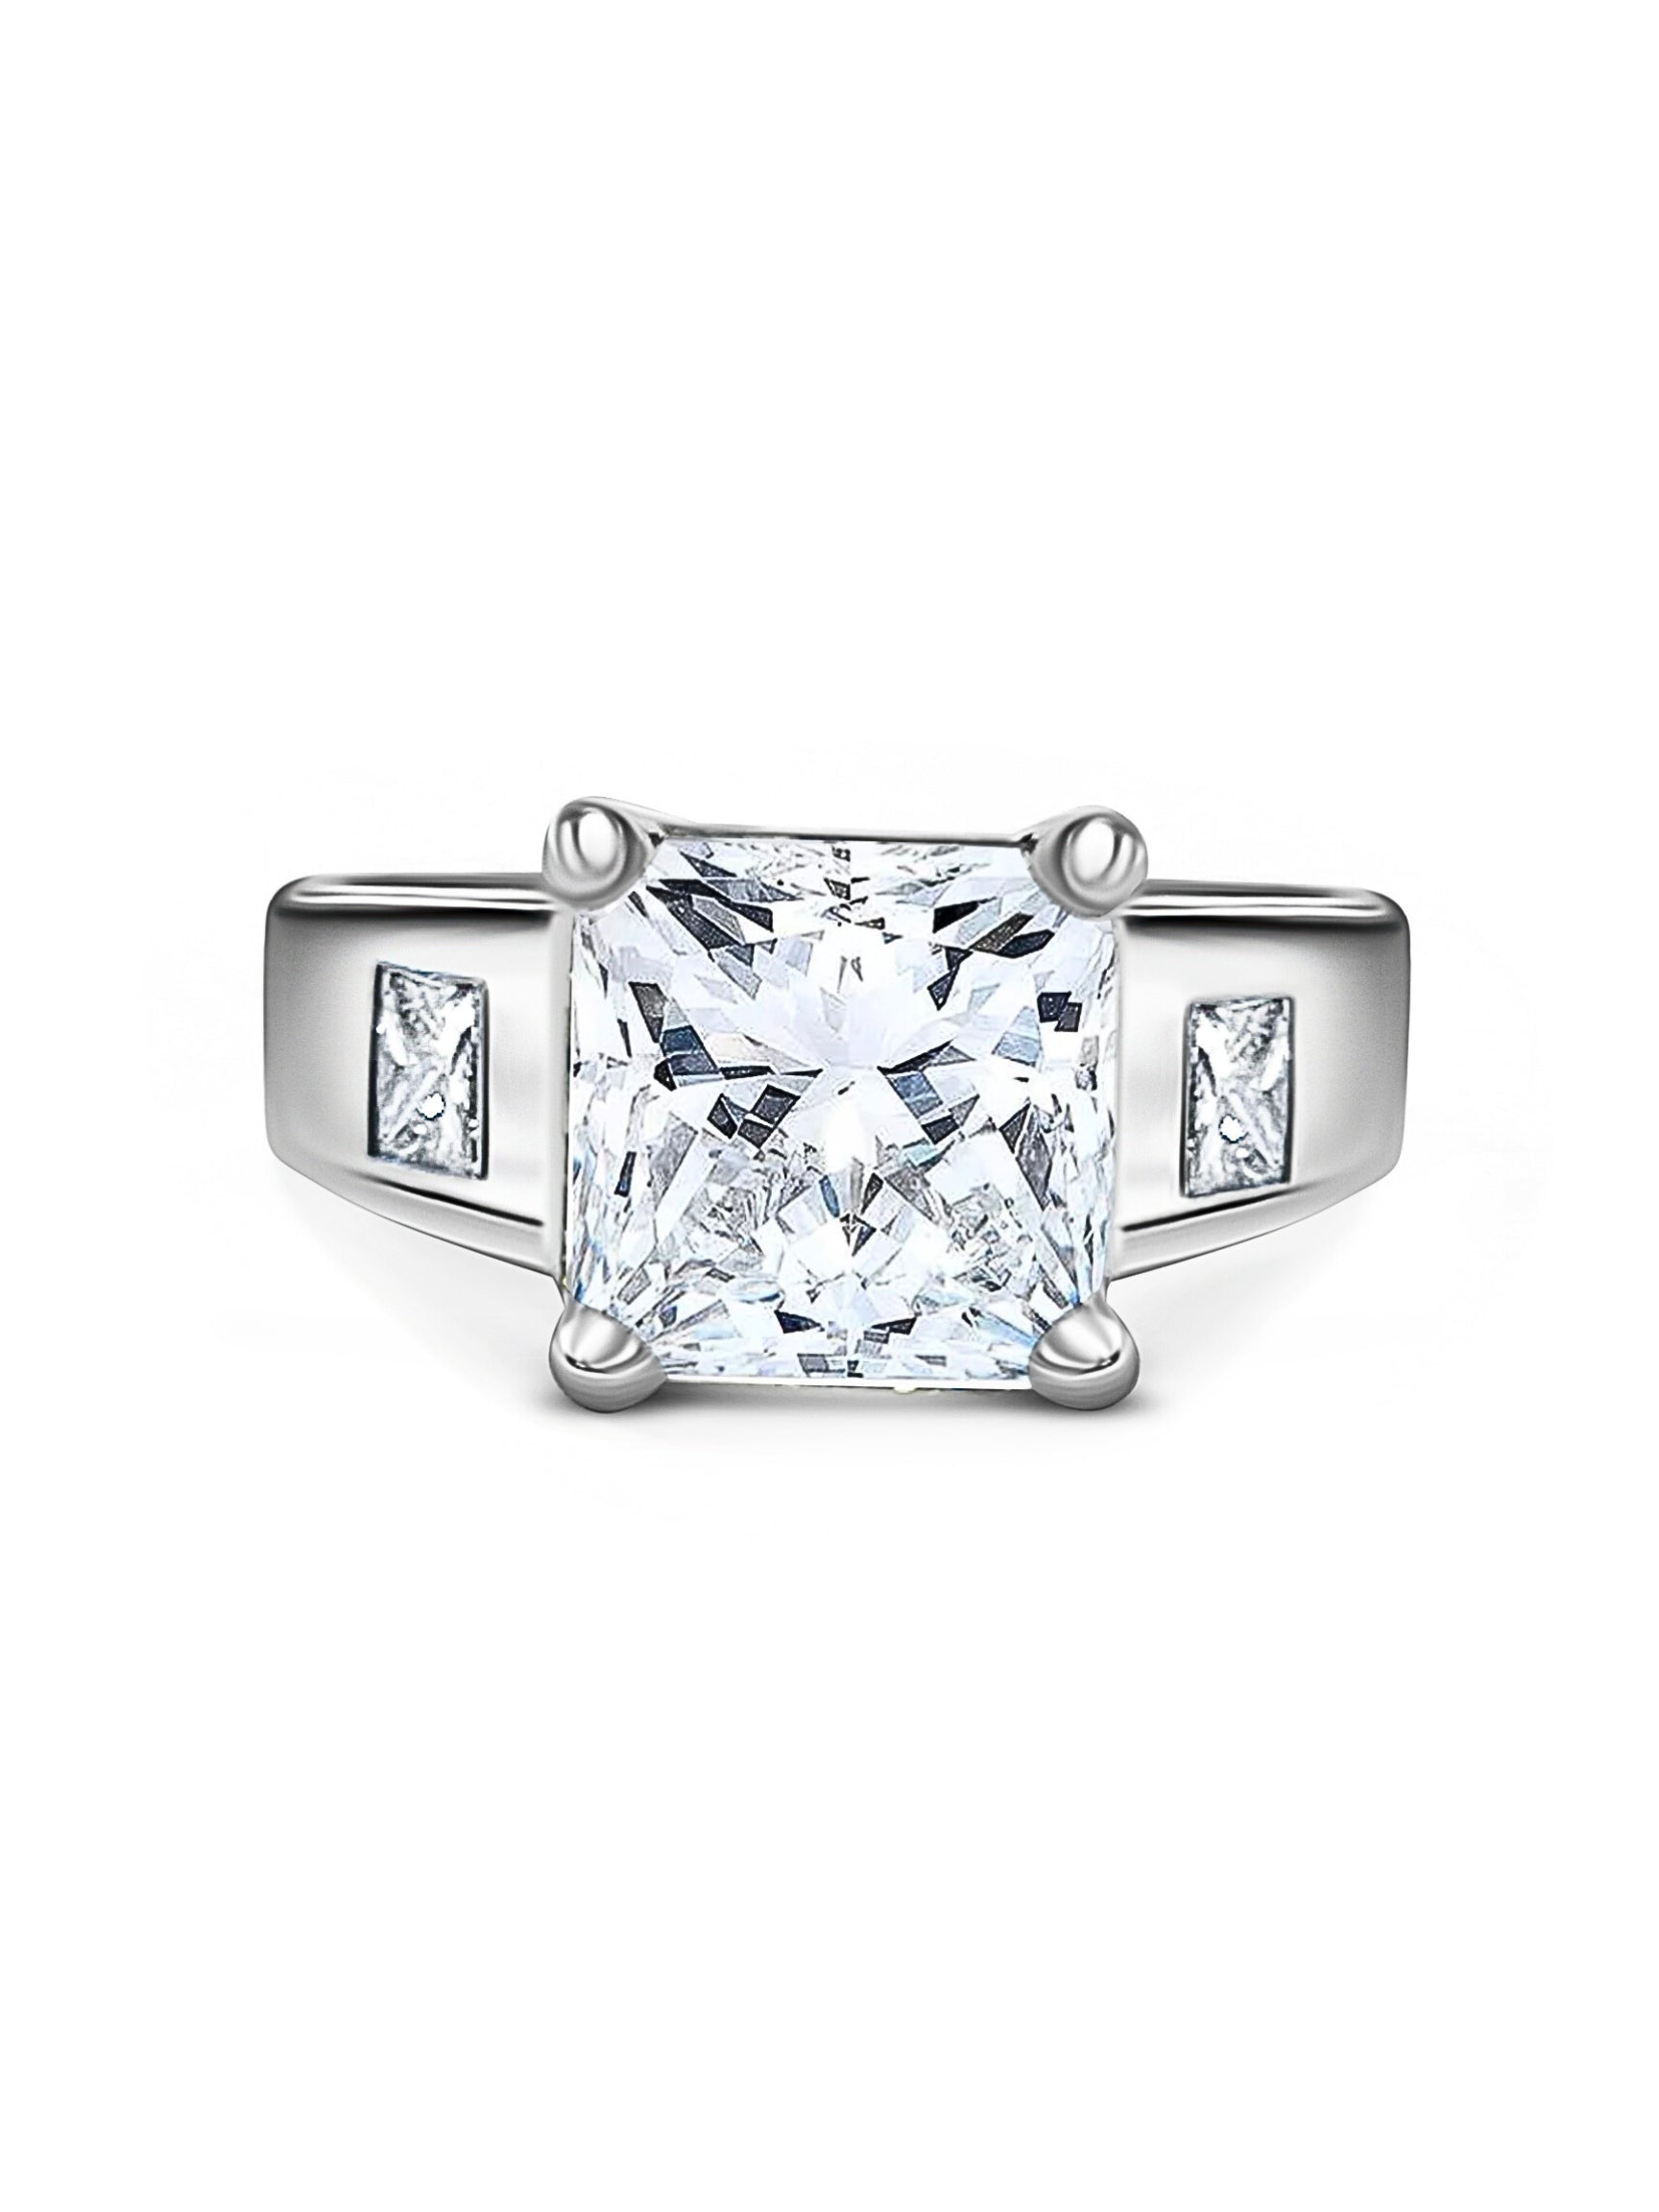 4 Carat Radiant Cut Lab Grown Diamond Ring With Half Moon Side Stone in 14K White Gold-Rings-ASSAY